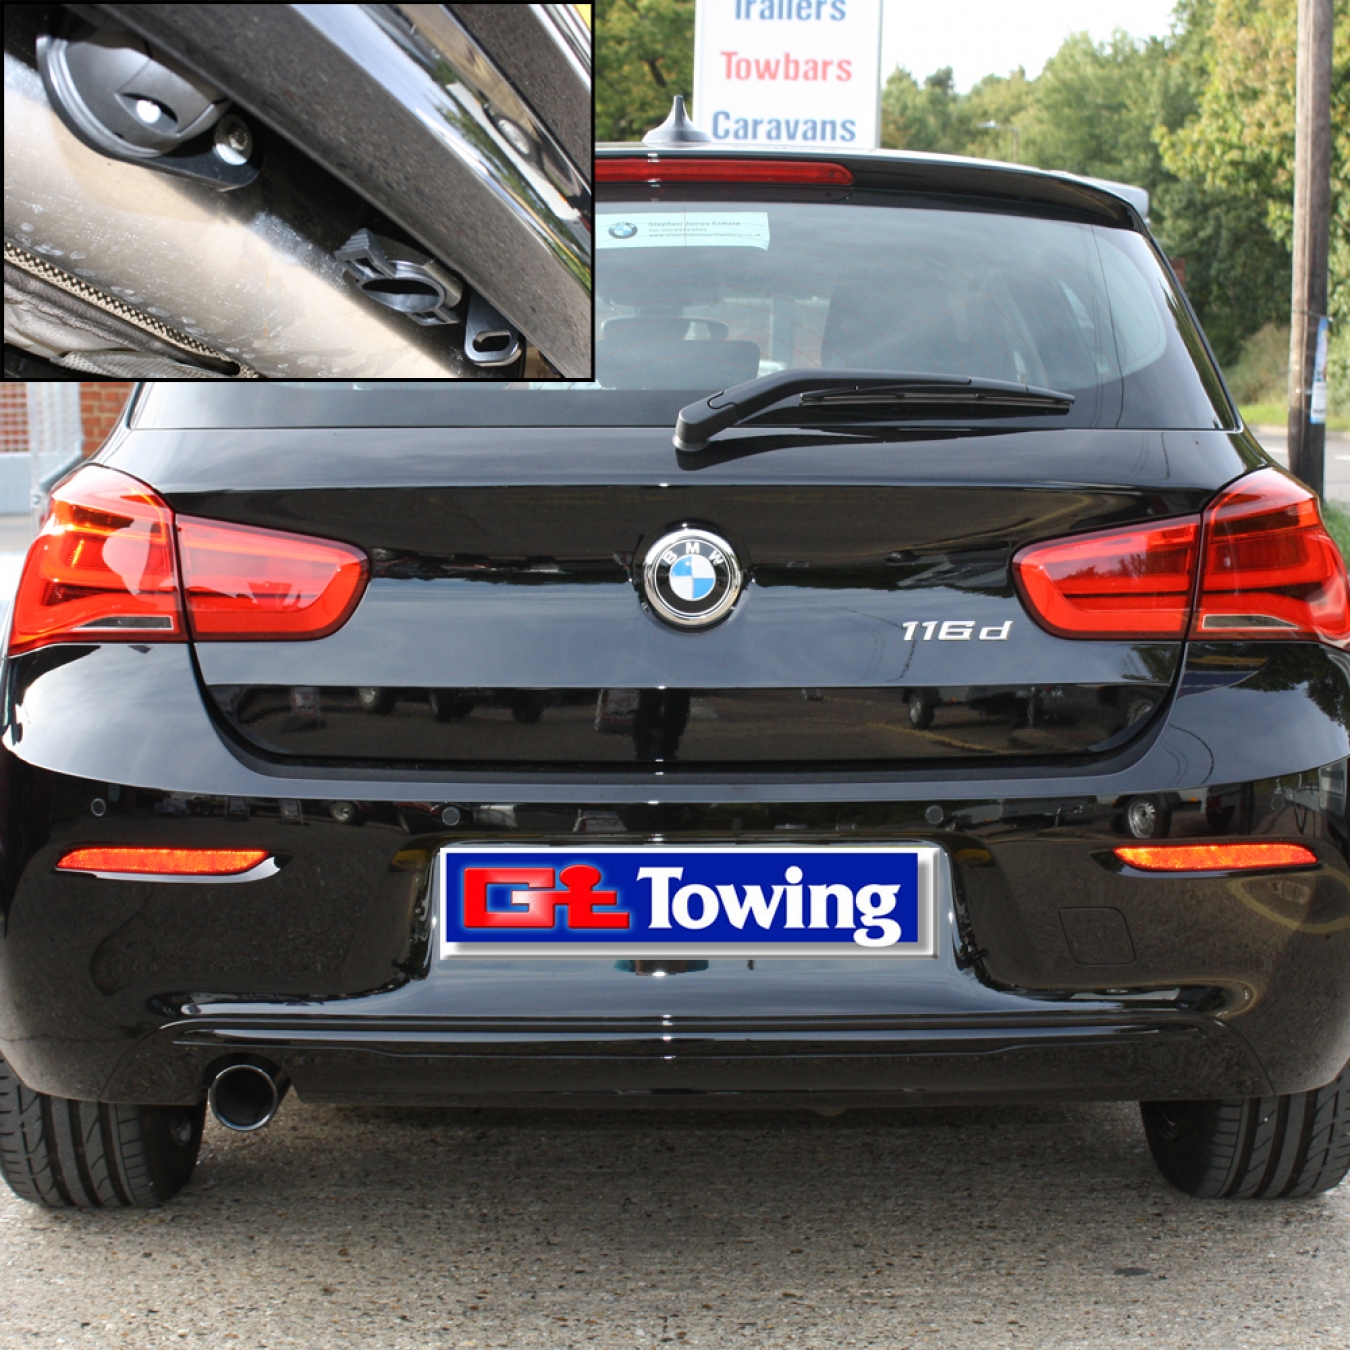 Fixed Swan Neck Towbar for BMW 1 Series Hatch 3-5door 11-15 Tow Bar 06033/F_A1 